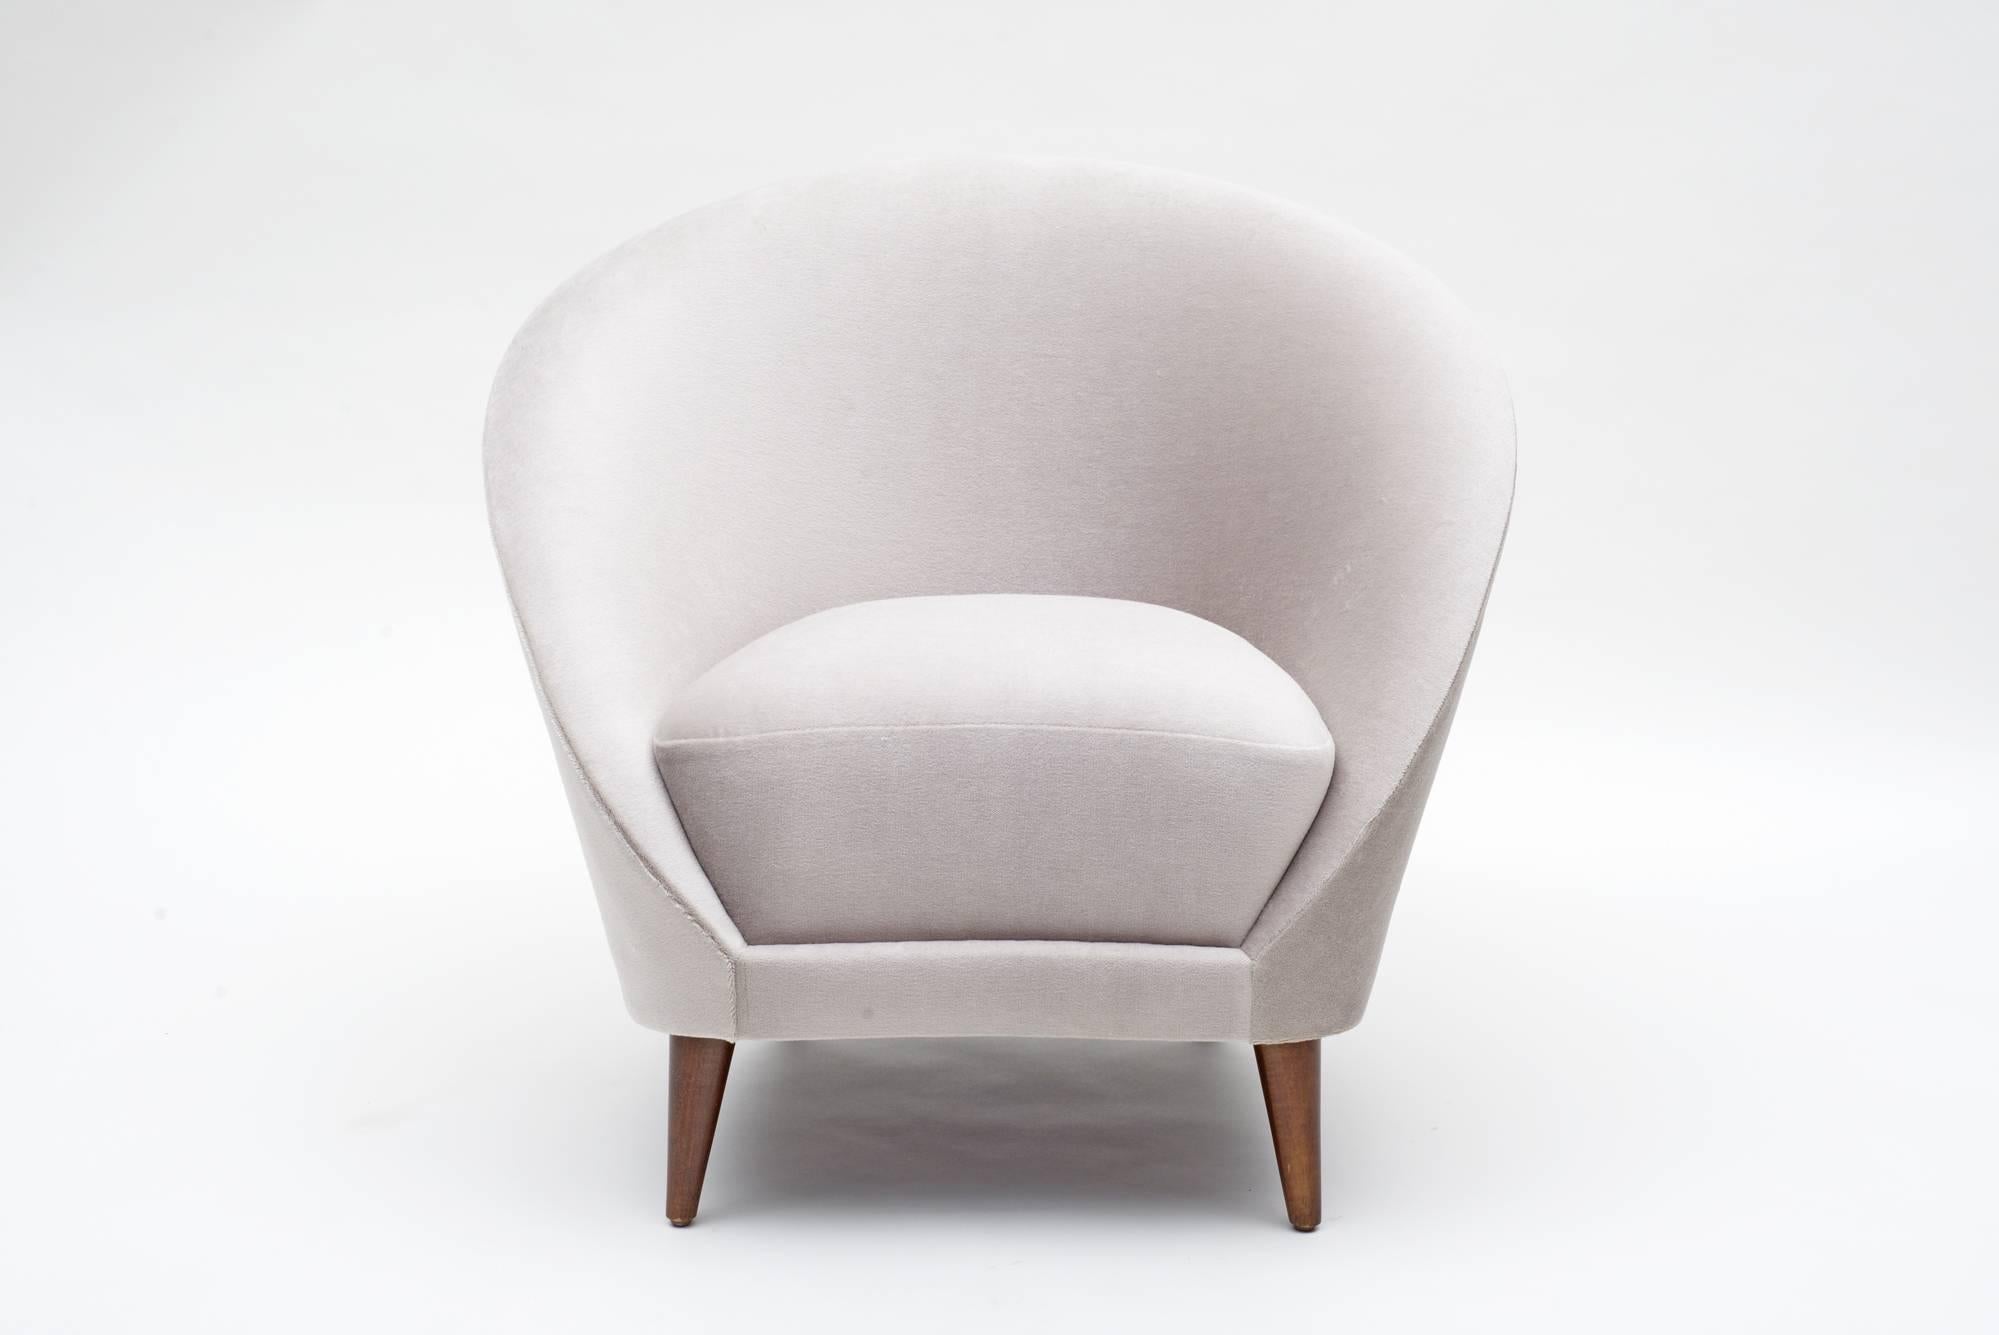 An incredible design reminiscent of some of the great Italian designers of the Mid-Century.